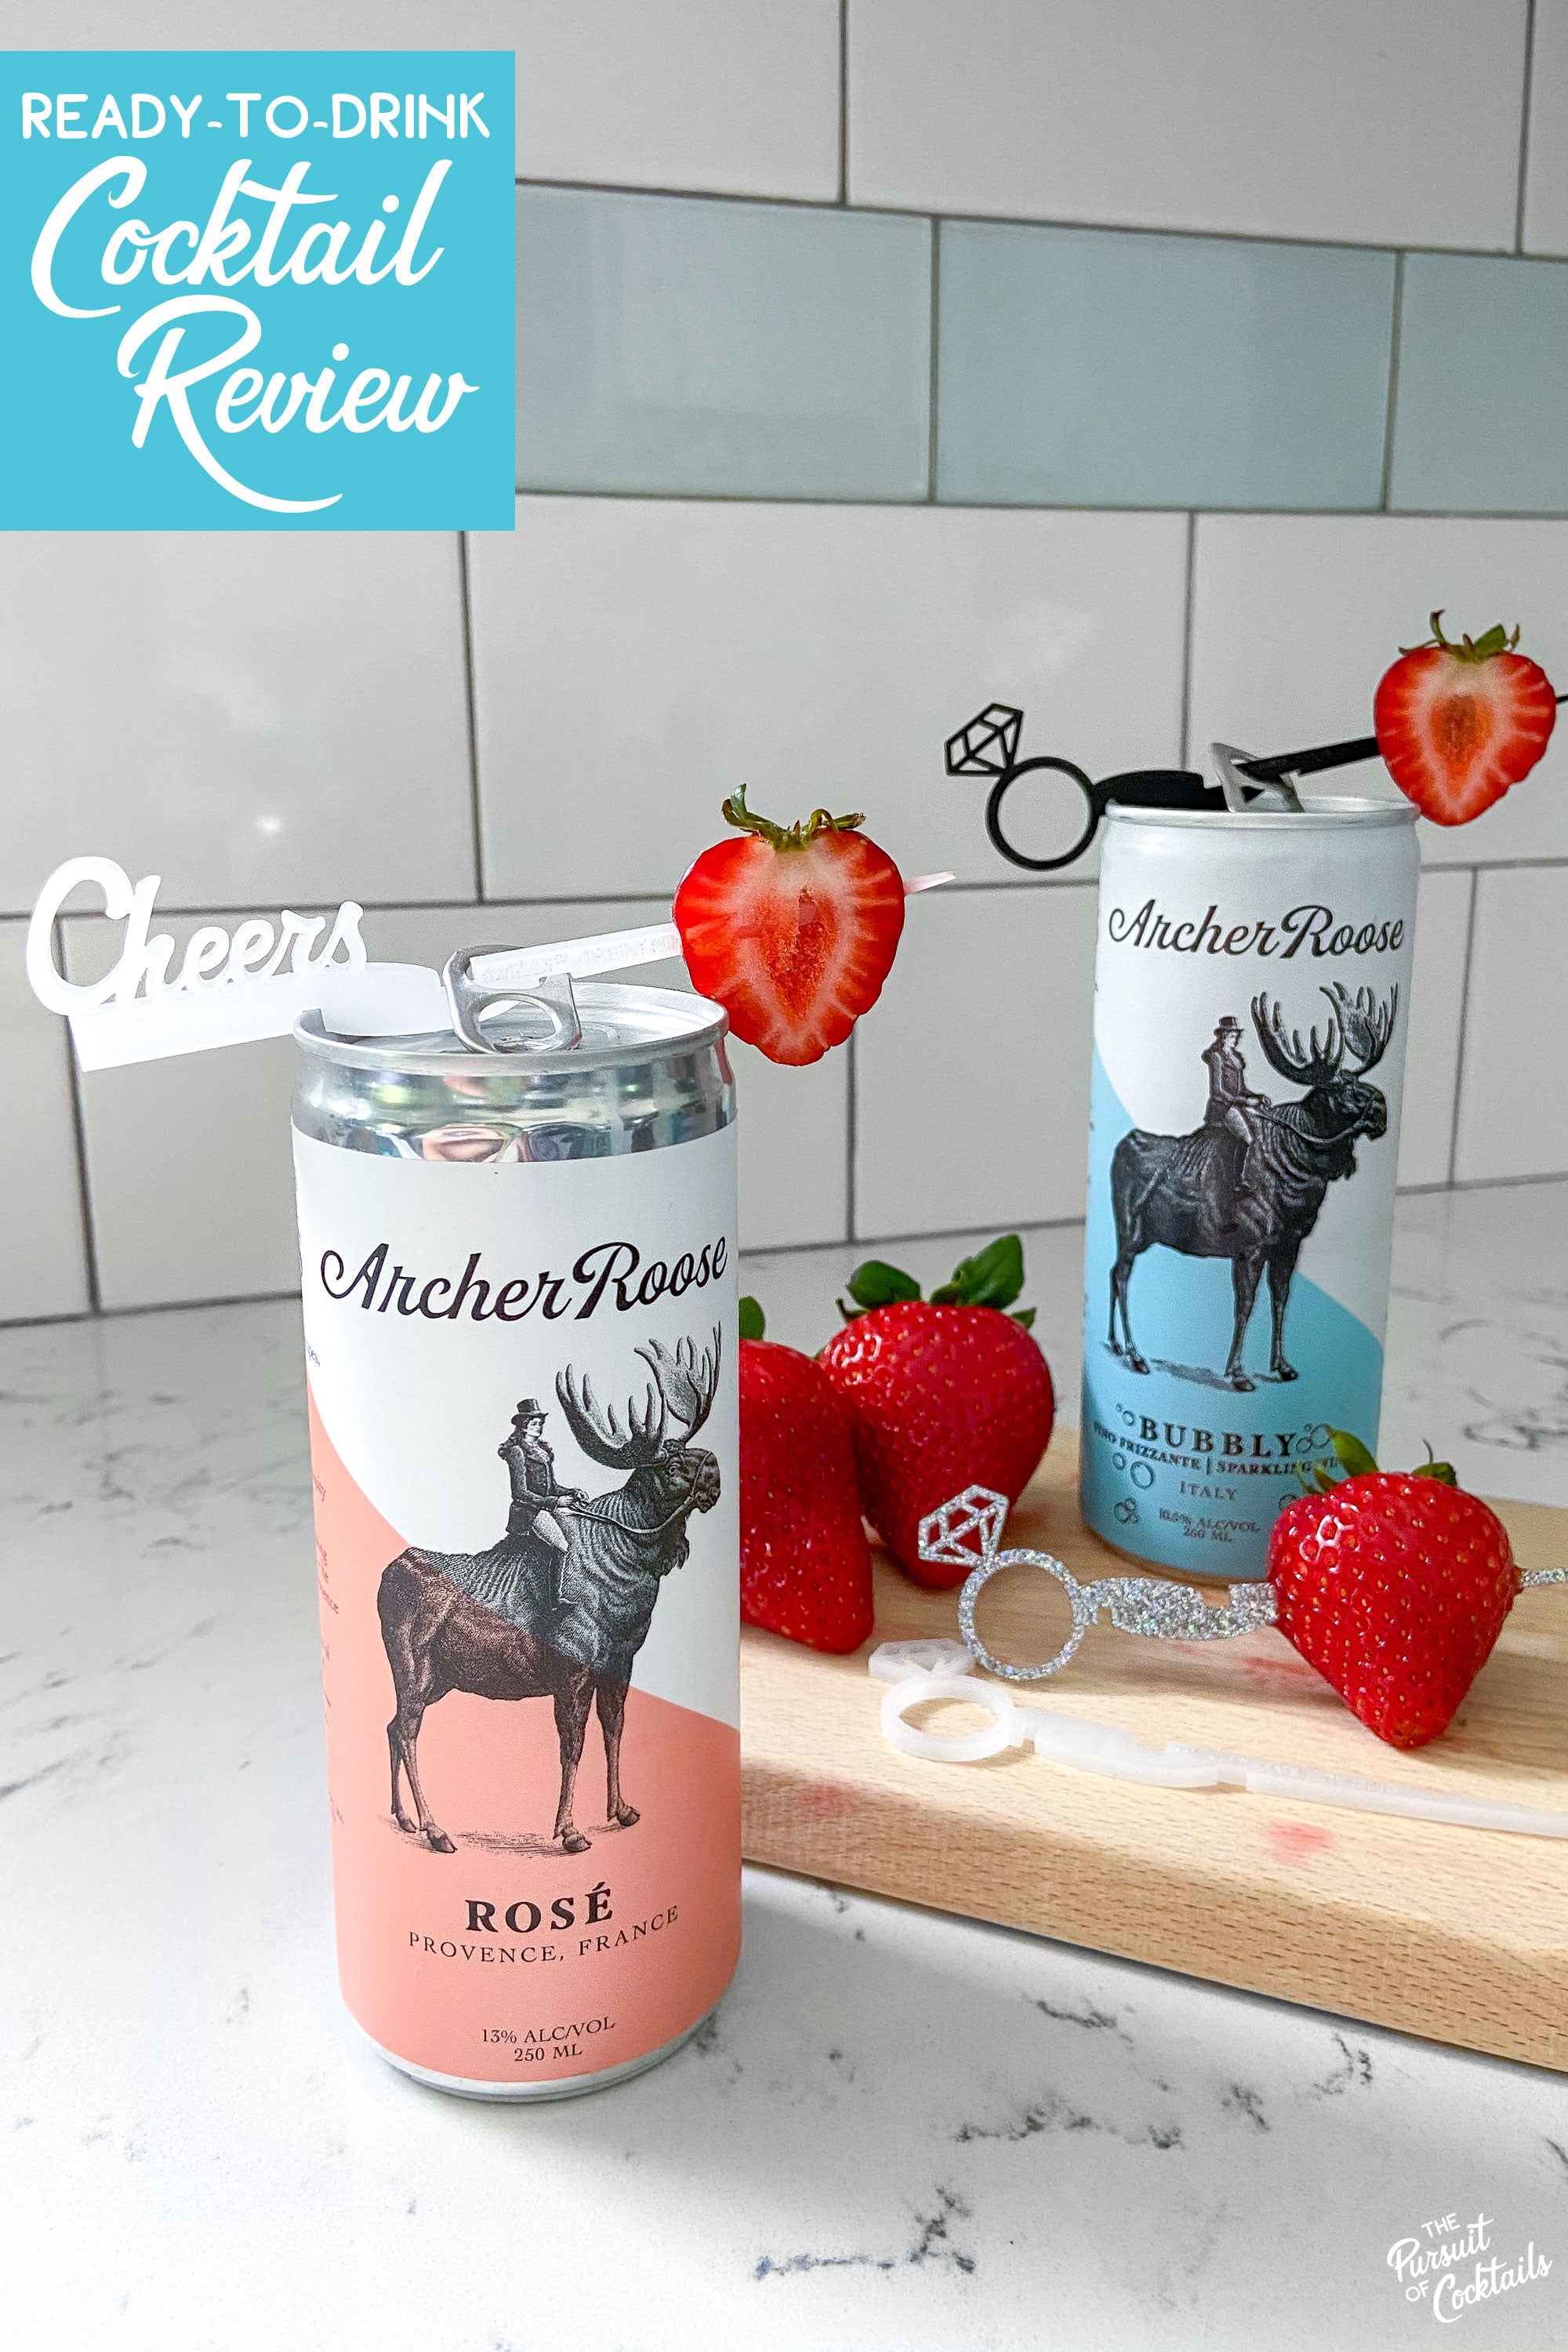 Canned wine review of Archer Roose Rose and Bubbly by The Pursuit of Cocktails